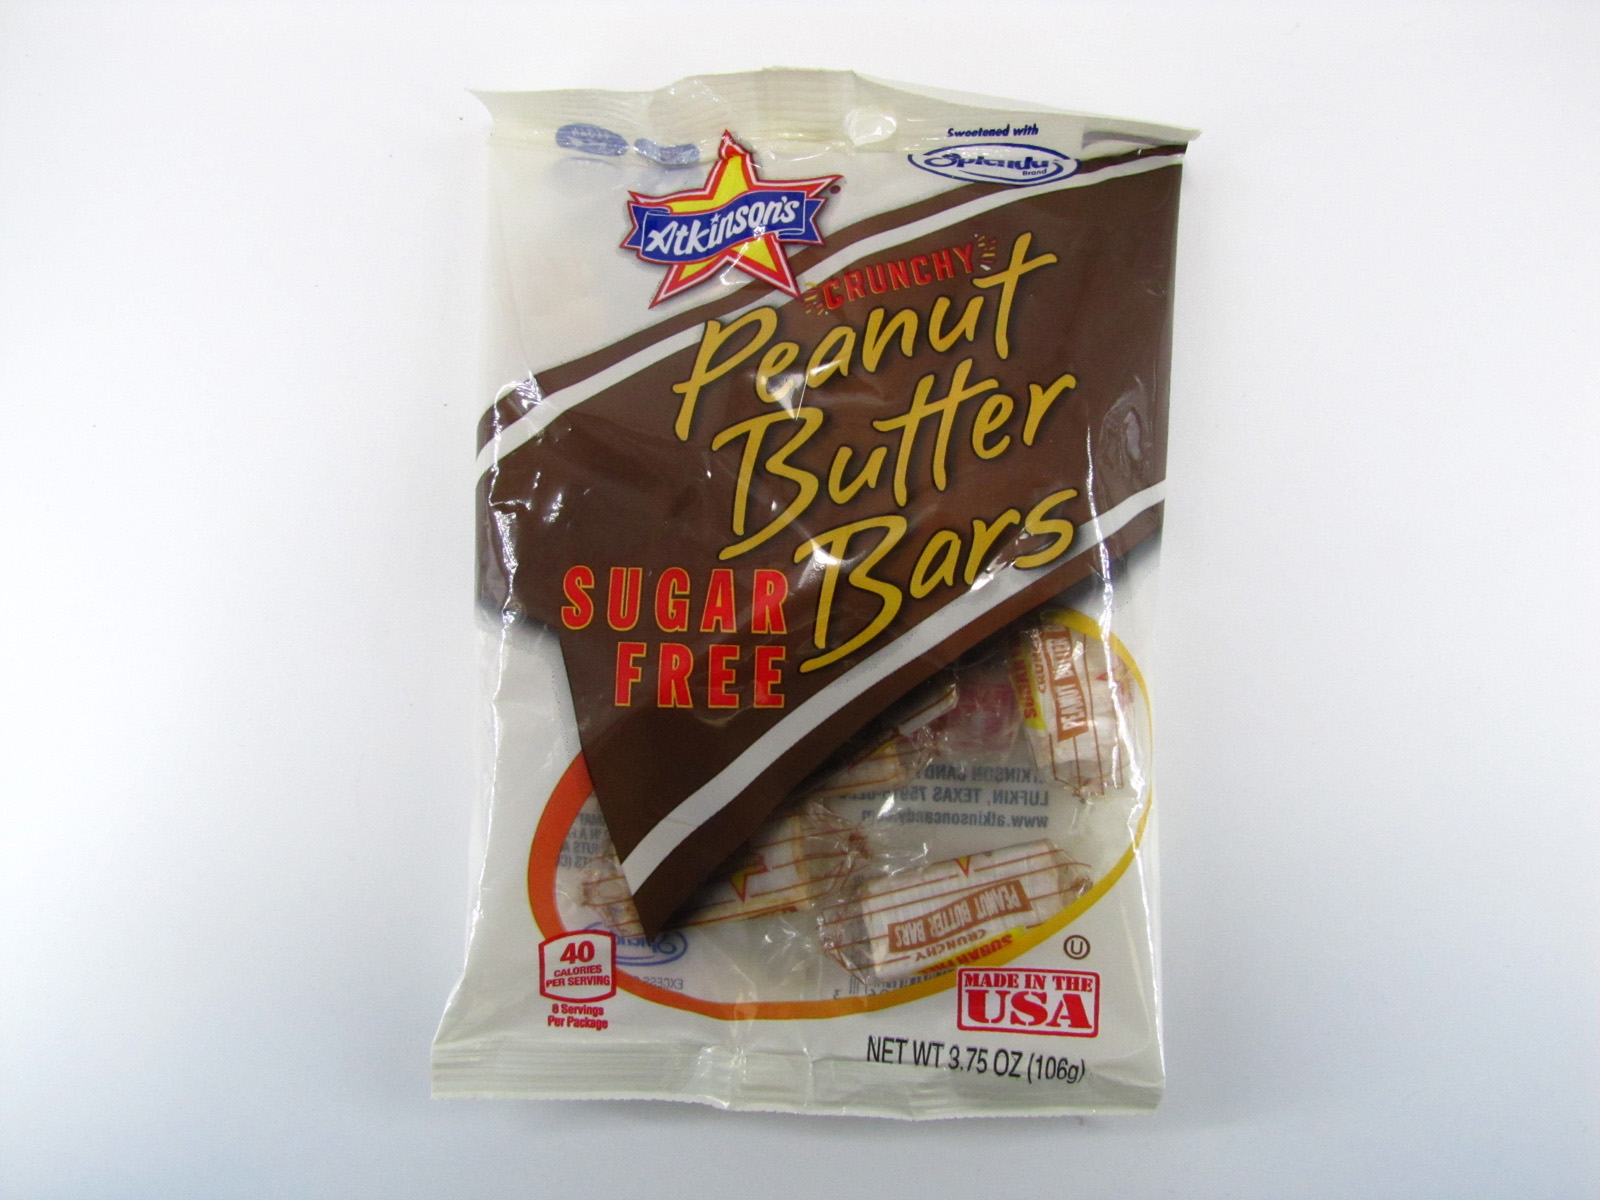 Atkinson's - Peanut butter bars front of bag image